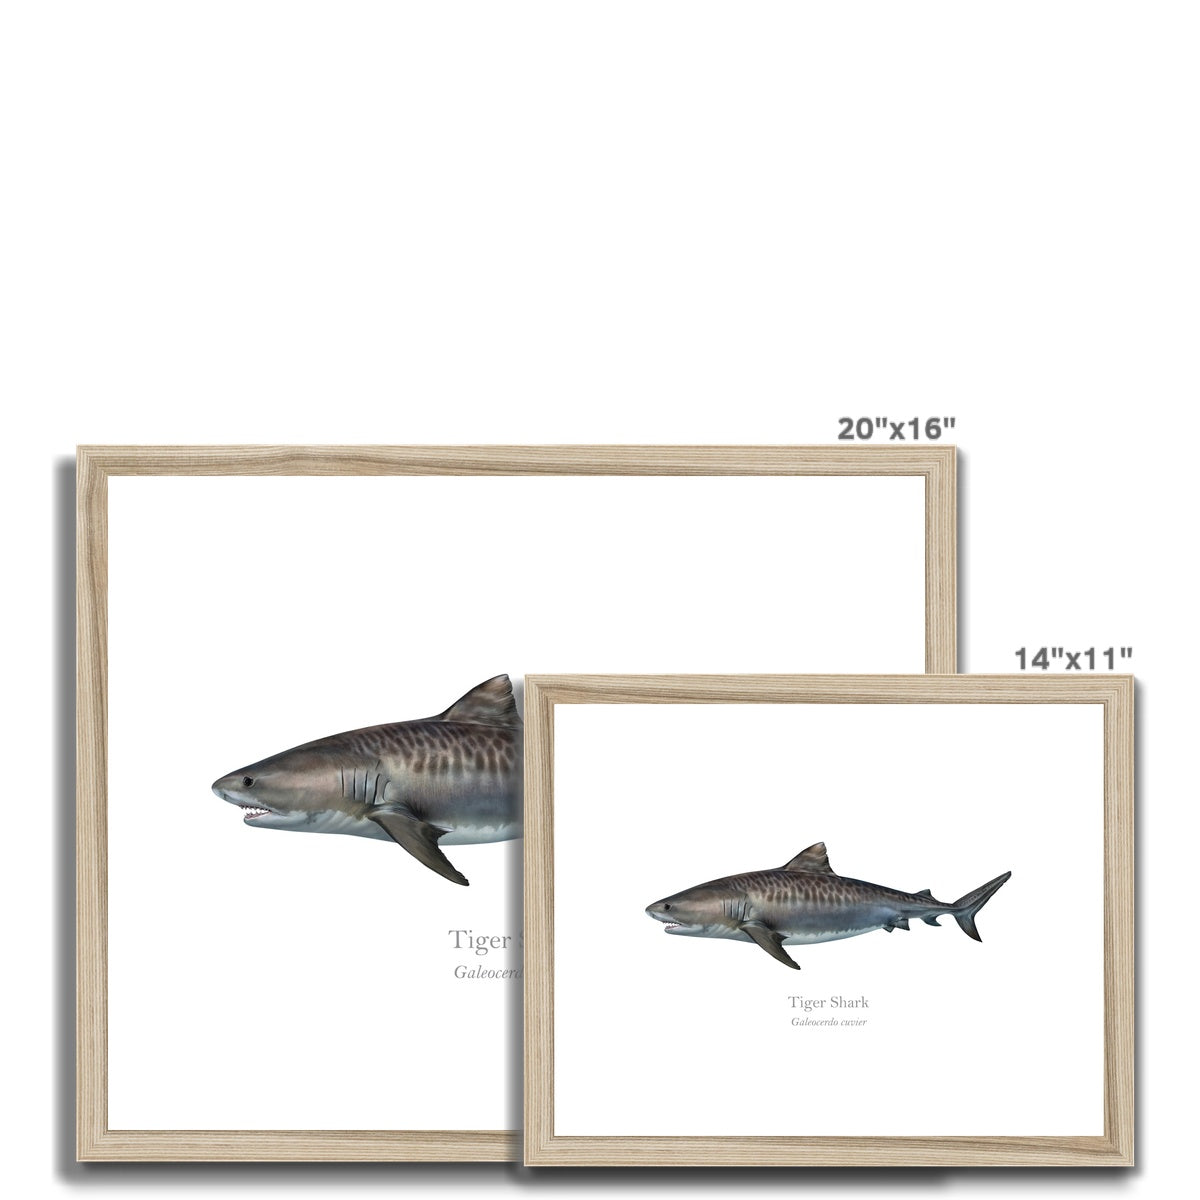 Tiger shark - Framed & Mounted Print - With Scientific Name